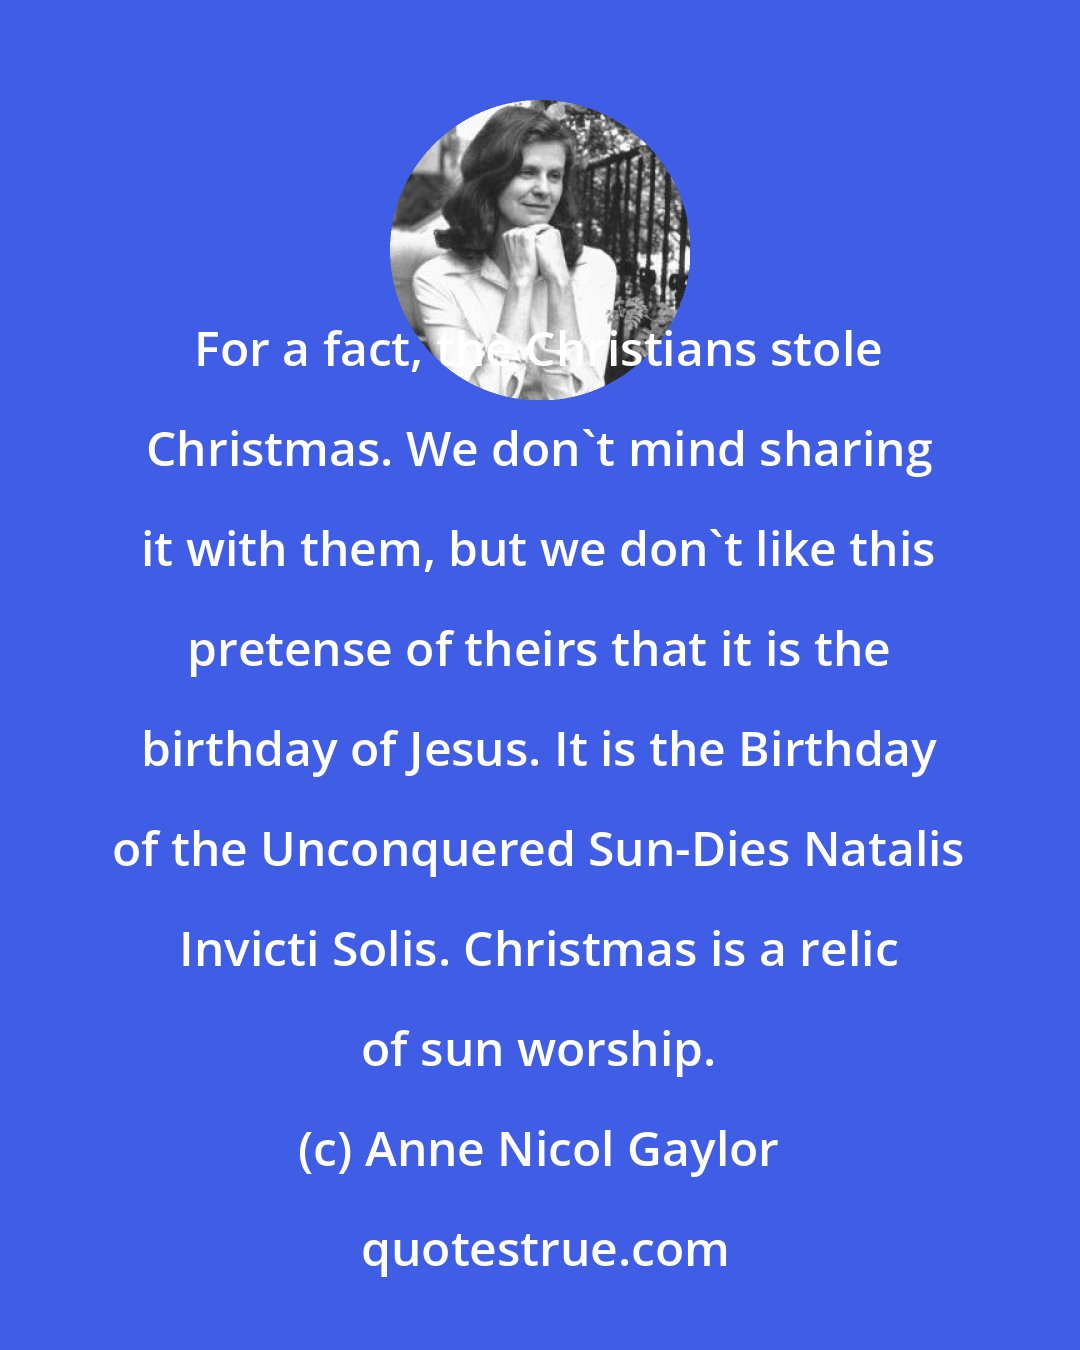 Anne Nicol Gaylor: For a fact, the Christians stole Christmas. We don't mind sharing it with them, but we don't like this pretense of theirs that it is the birthday of Jesus. It is the Birthday of the Unconquered Sun-Dies Natalis Invicti Solis. Christmas is a relic of sun worship.